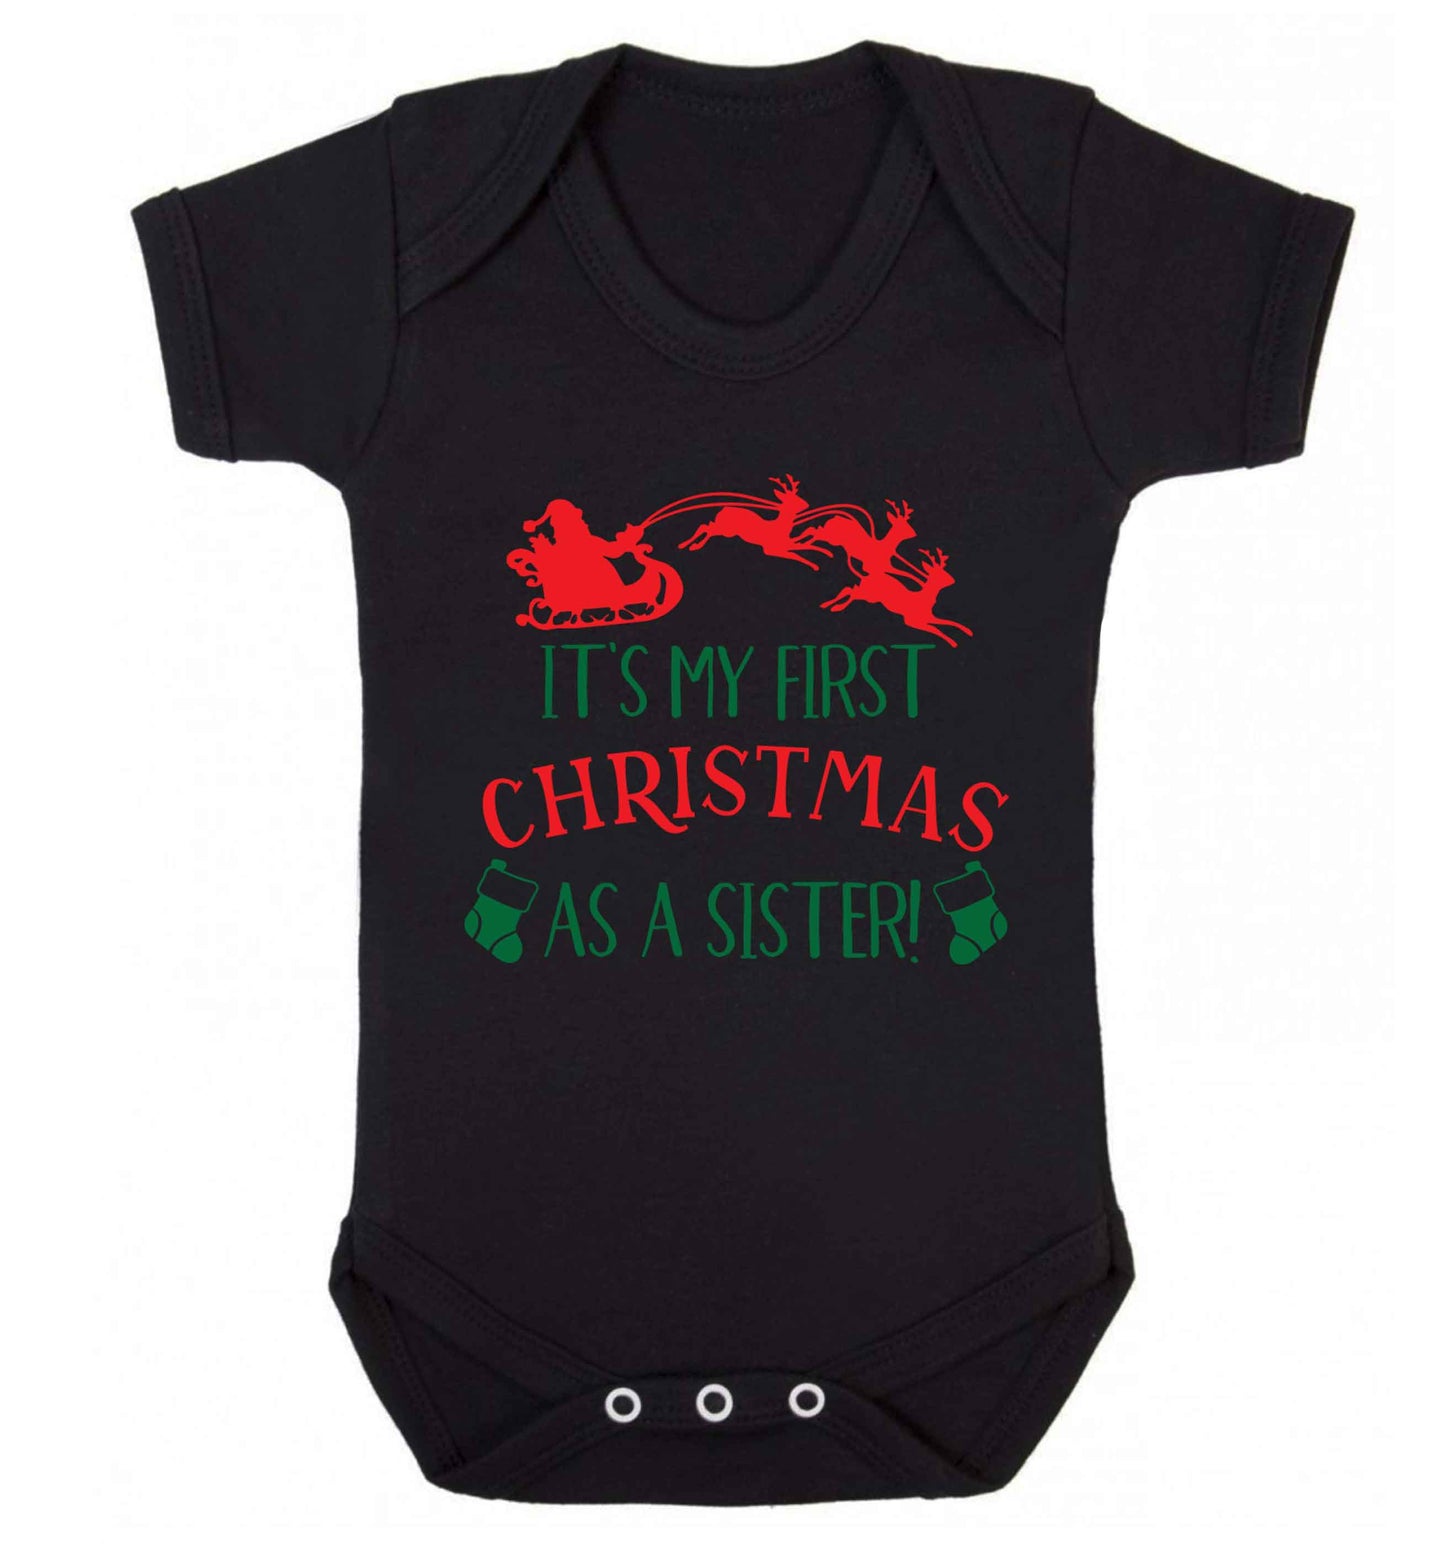 It's my first Christmas as a sister! Baby Vest black 18-24 months